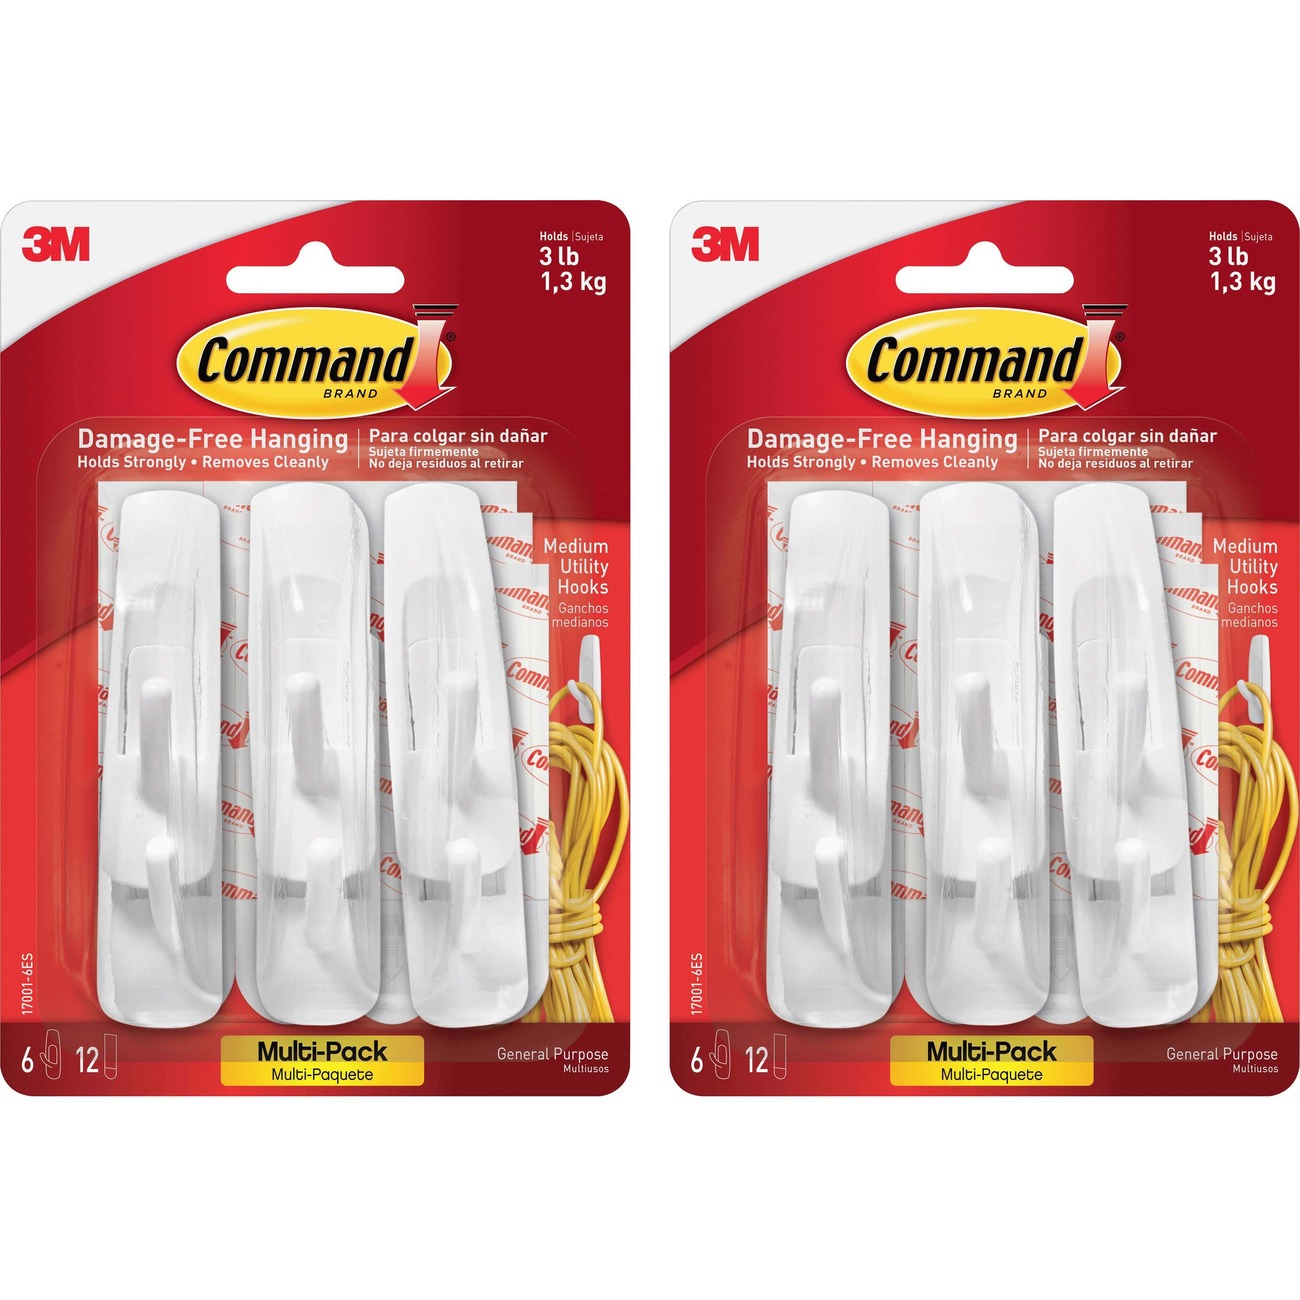 3M COMMAND 1.36kg 6 x Medium Mounting Refill Replacement Strips 